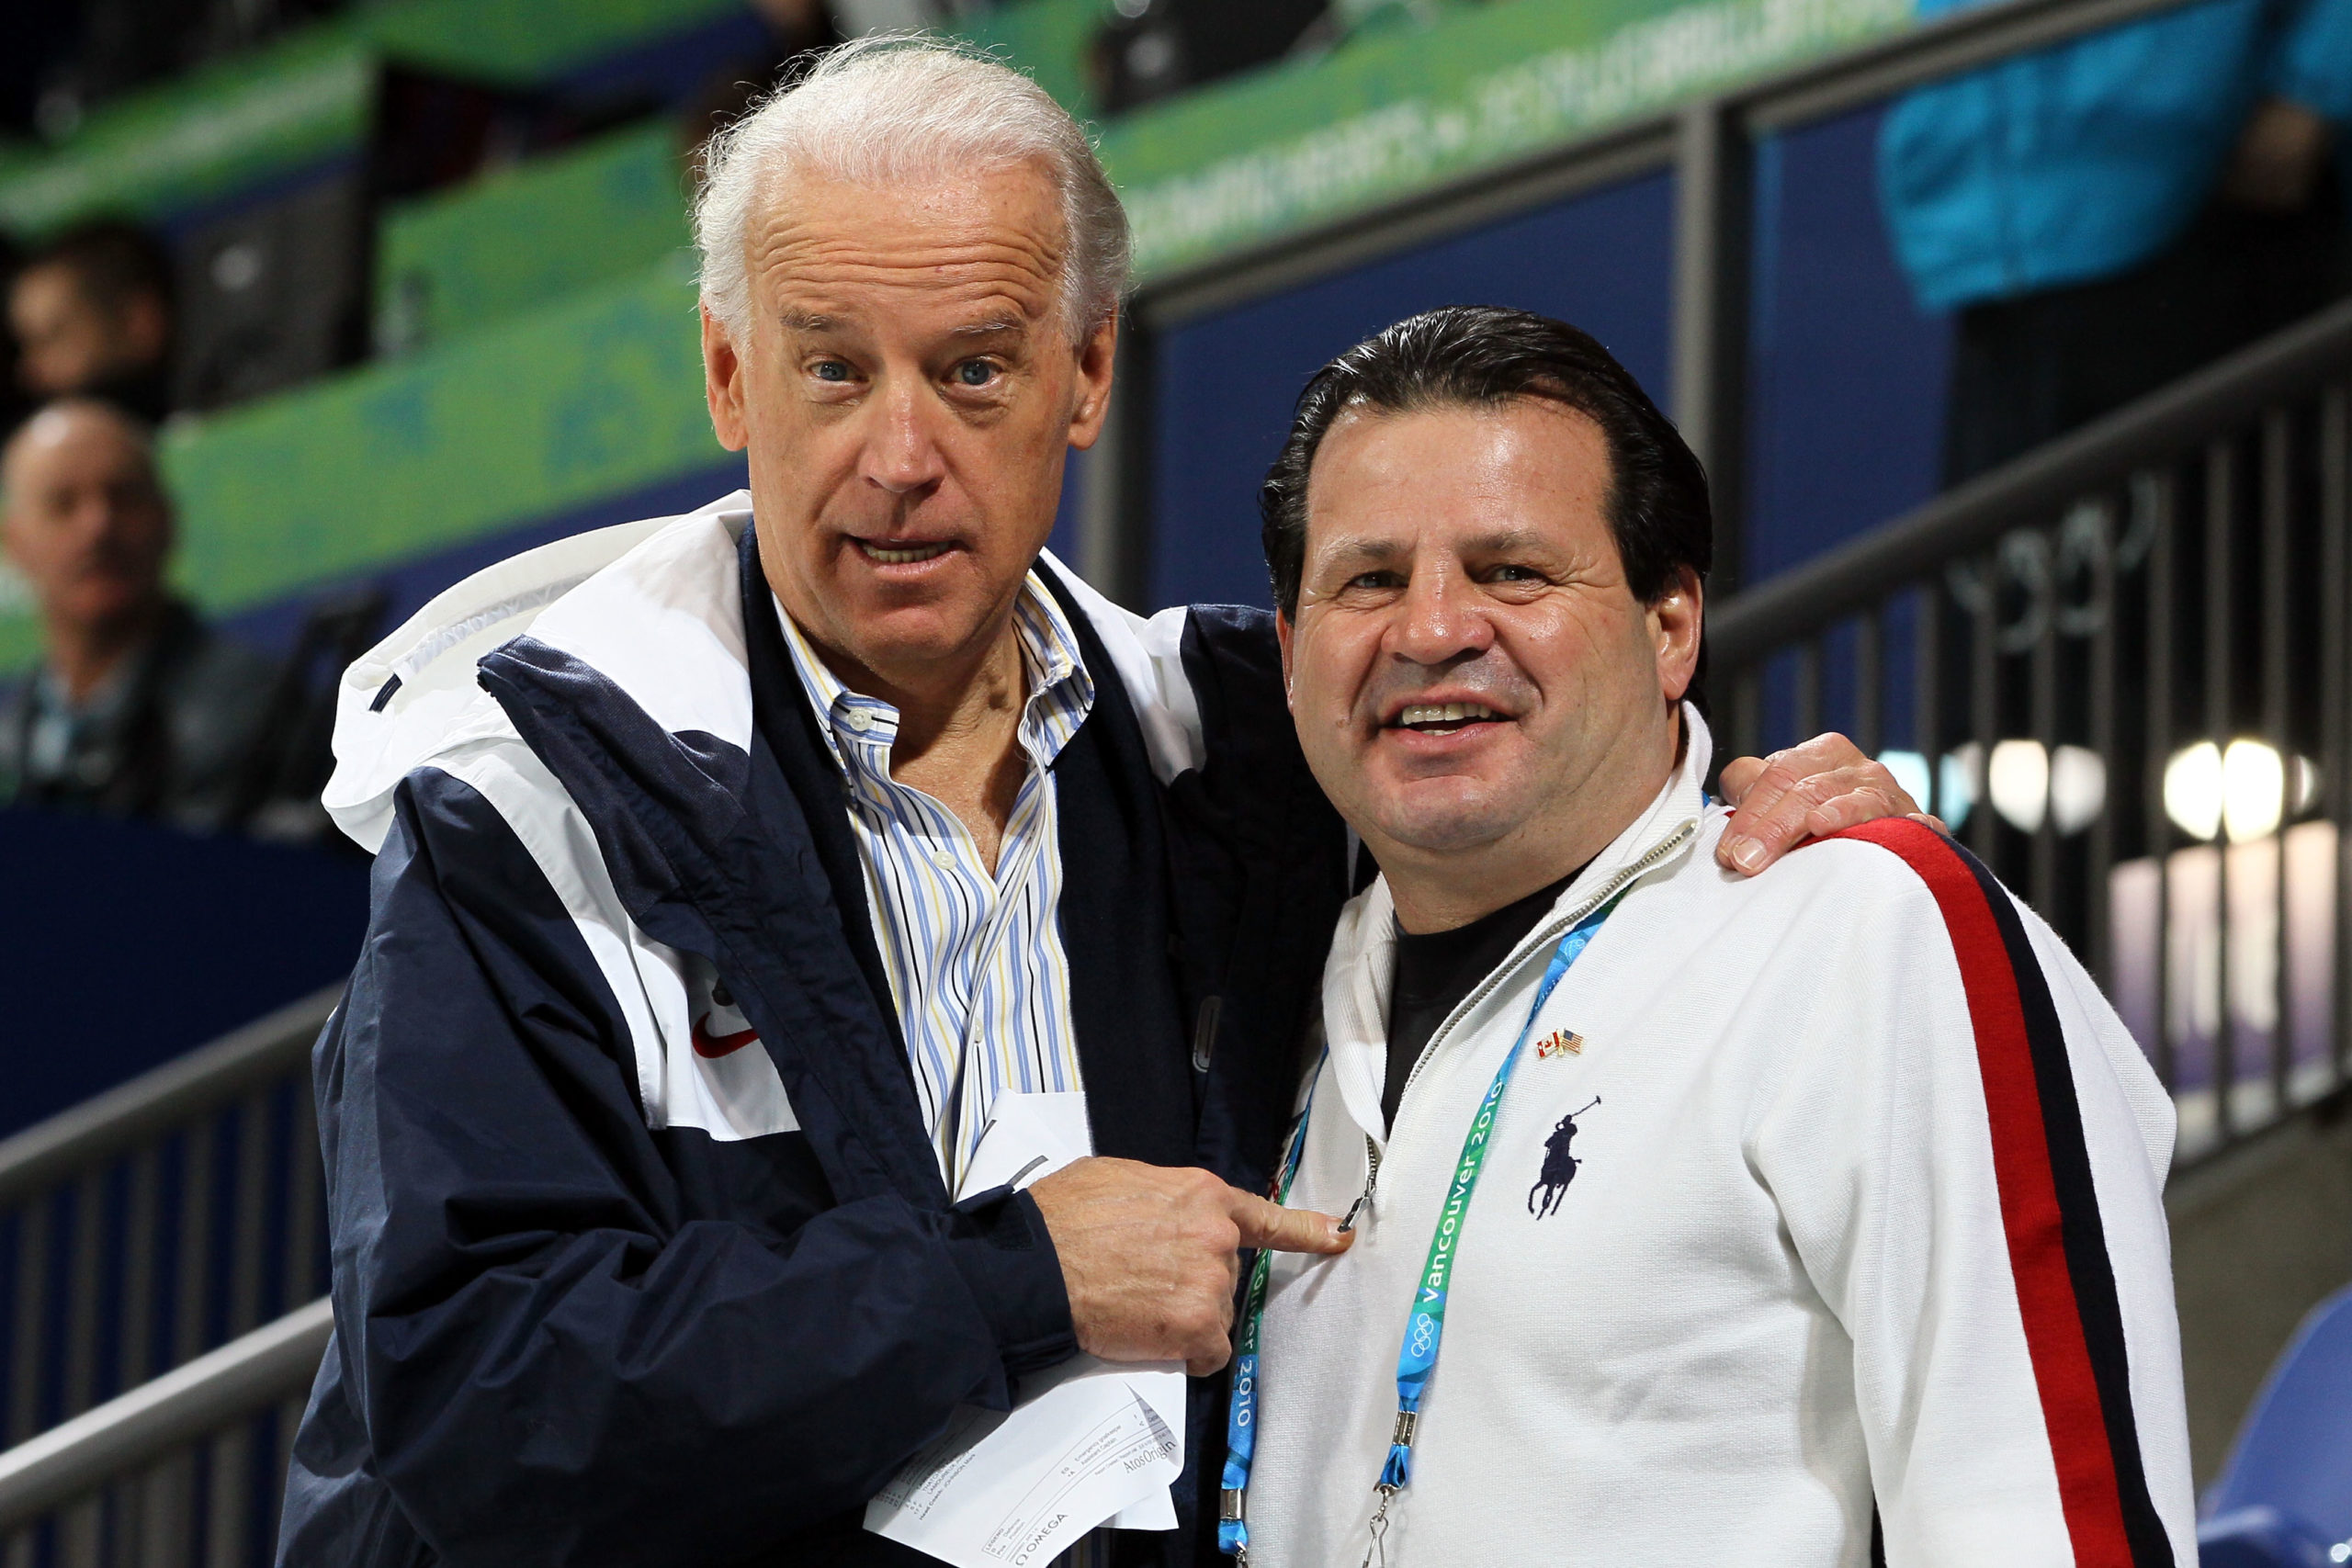 VANCOUVER, BC - FEBRUARY 14: United States vice-president Joe Biden and Mike Eruzione attend women's ice hockey preliminary game between United States and China at UBC Thunderbird Arena on February 14, 2010 in Vancouver, Canada. (Photo by Bruce Bennett/Getty Images)